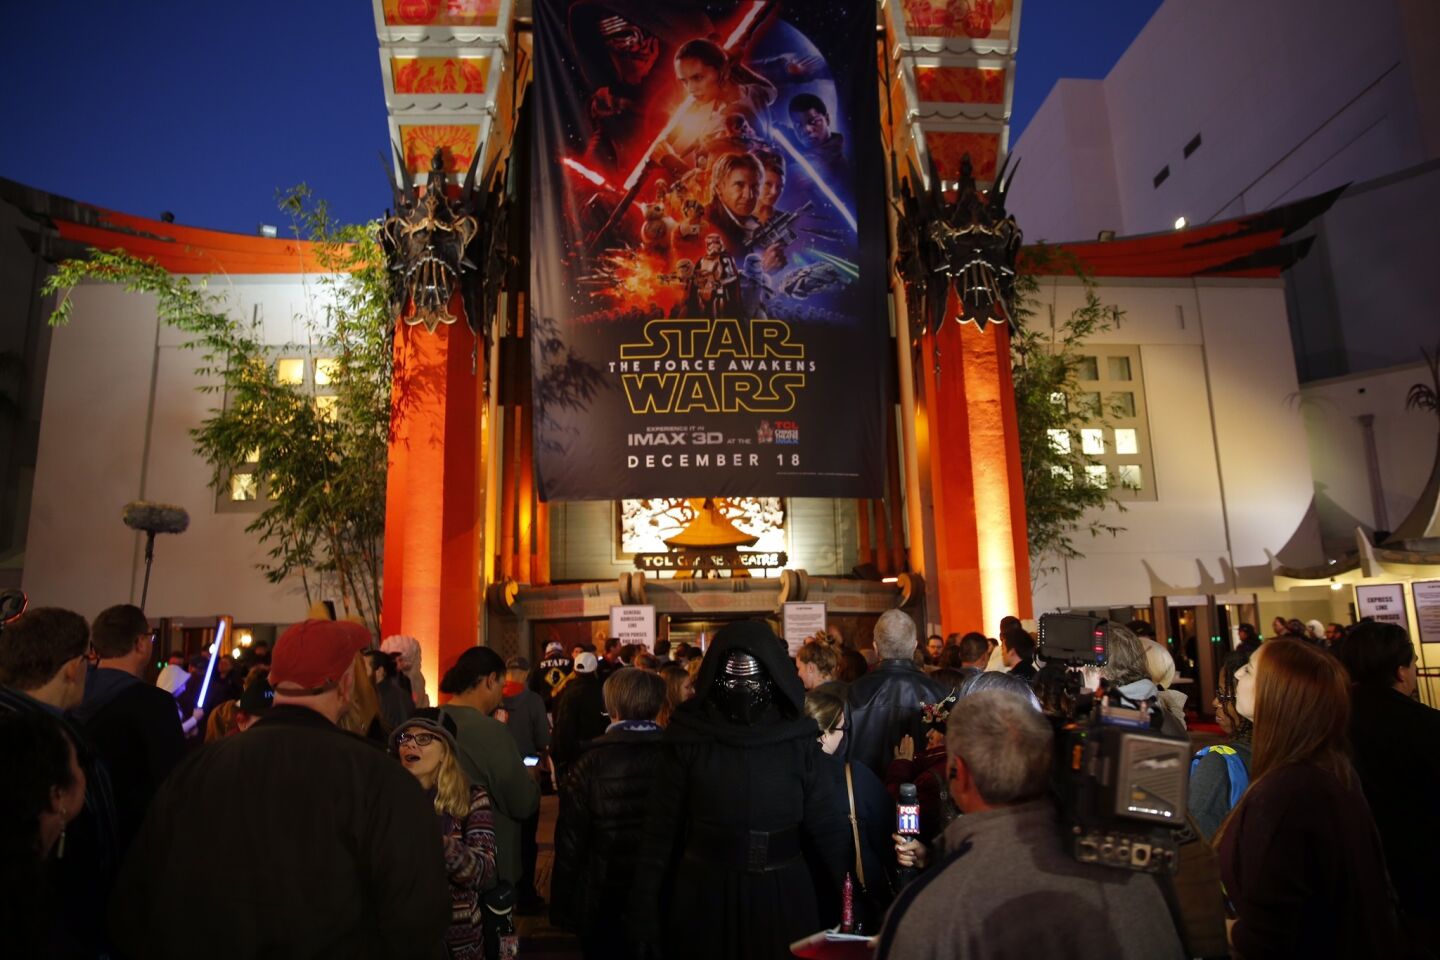 Showtime for 'Star Wars' fans